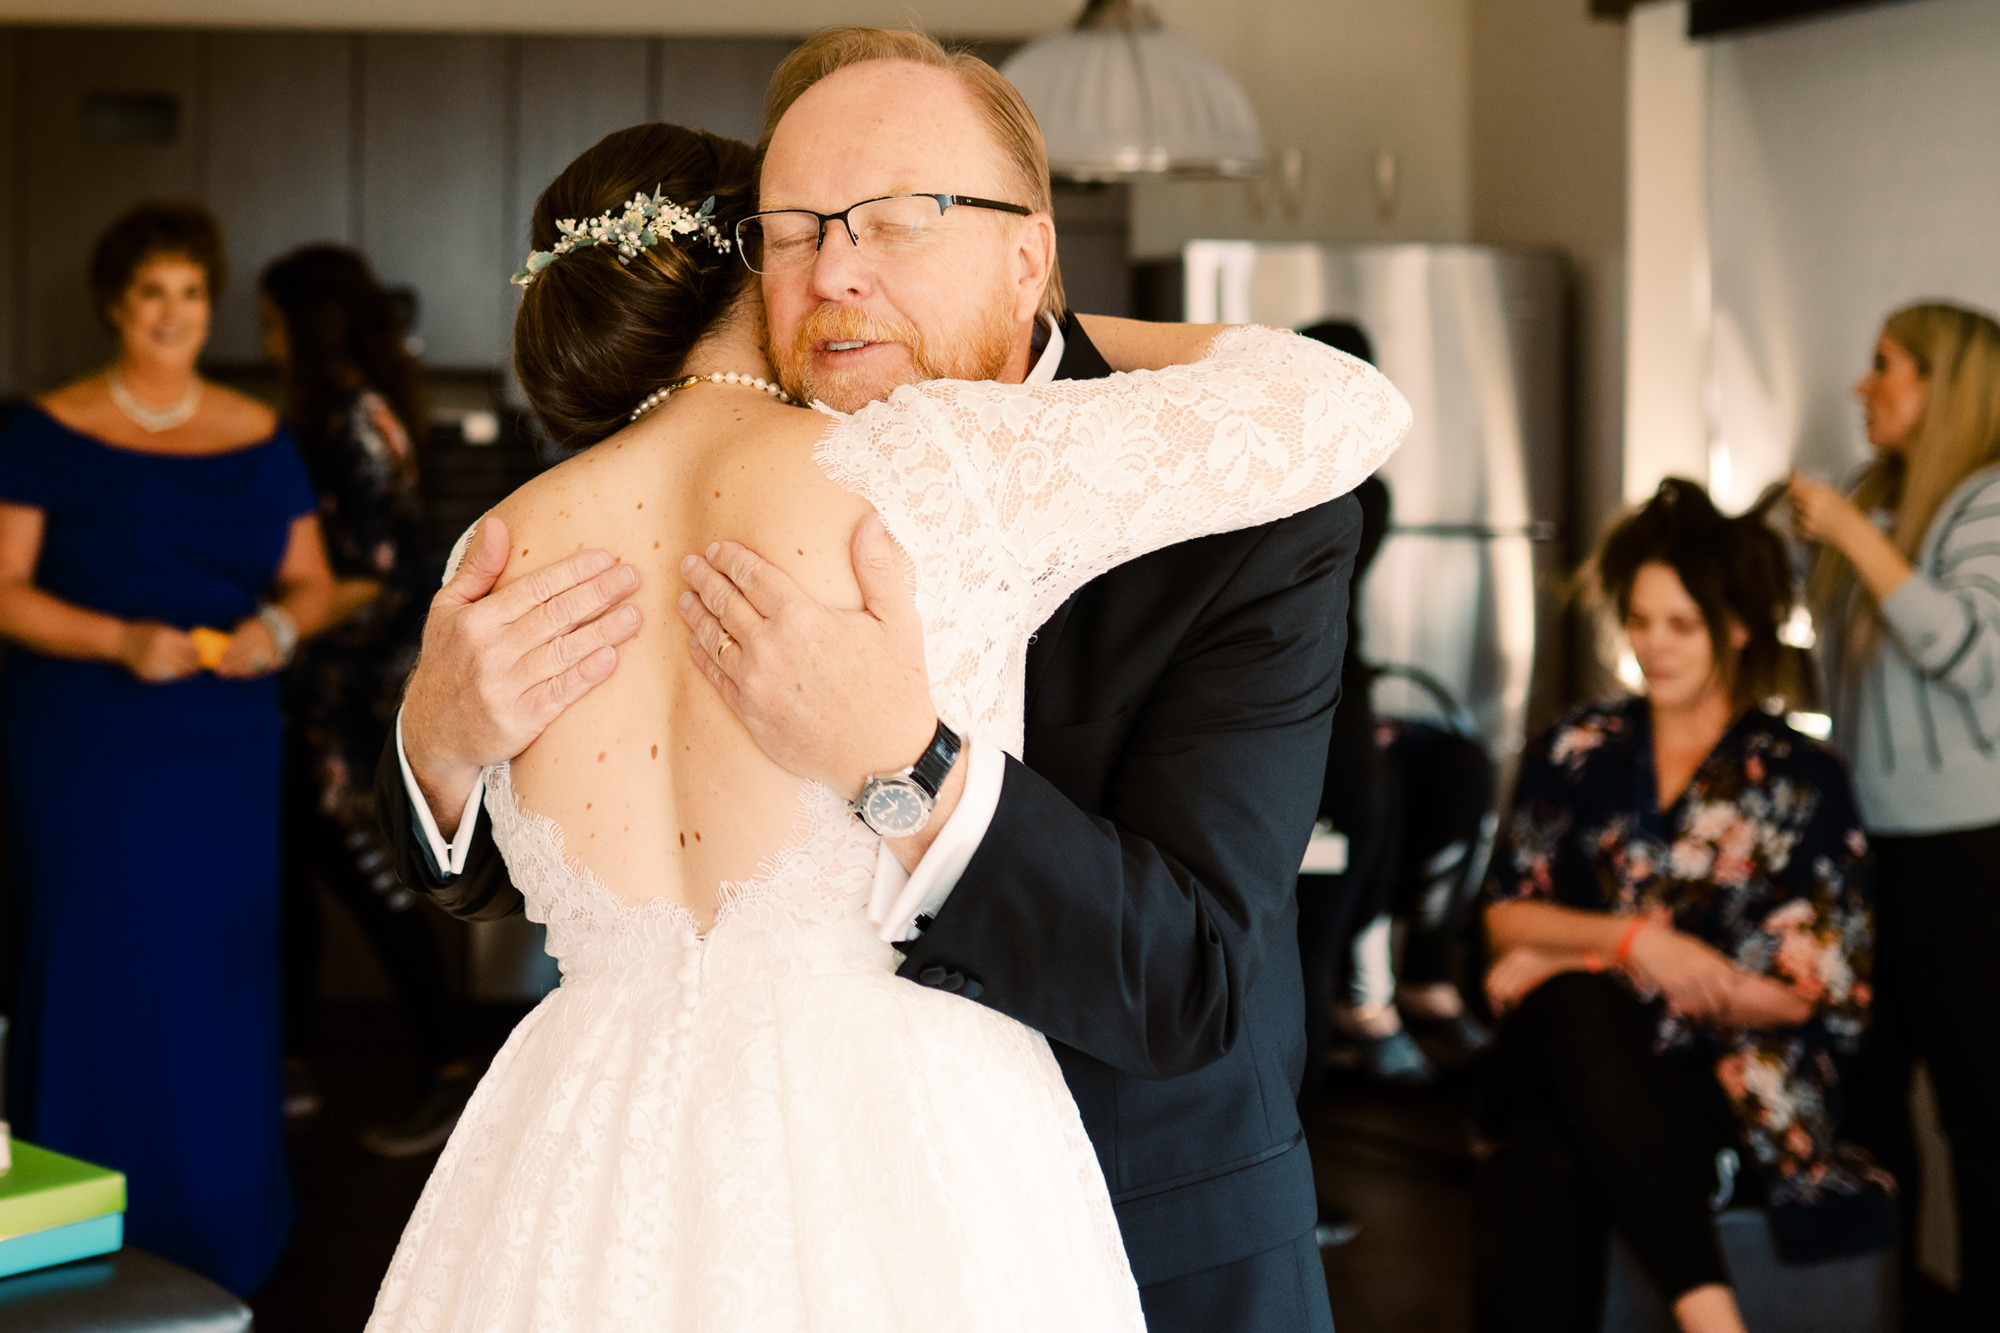 Father of the bride gives her a hug